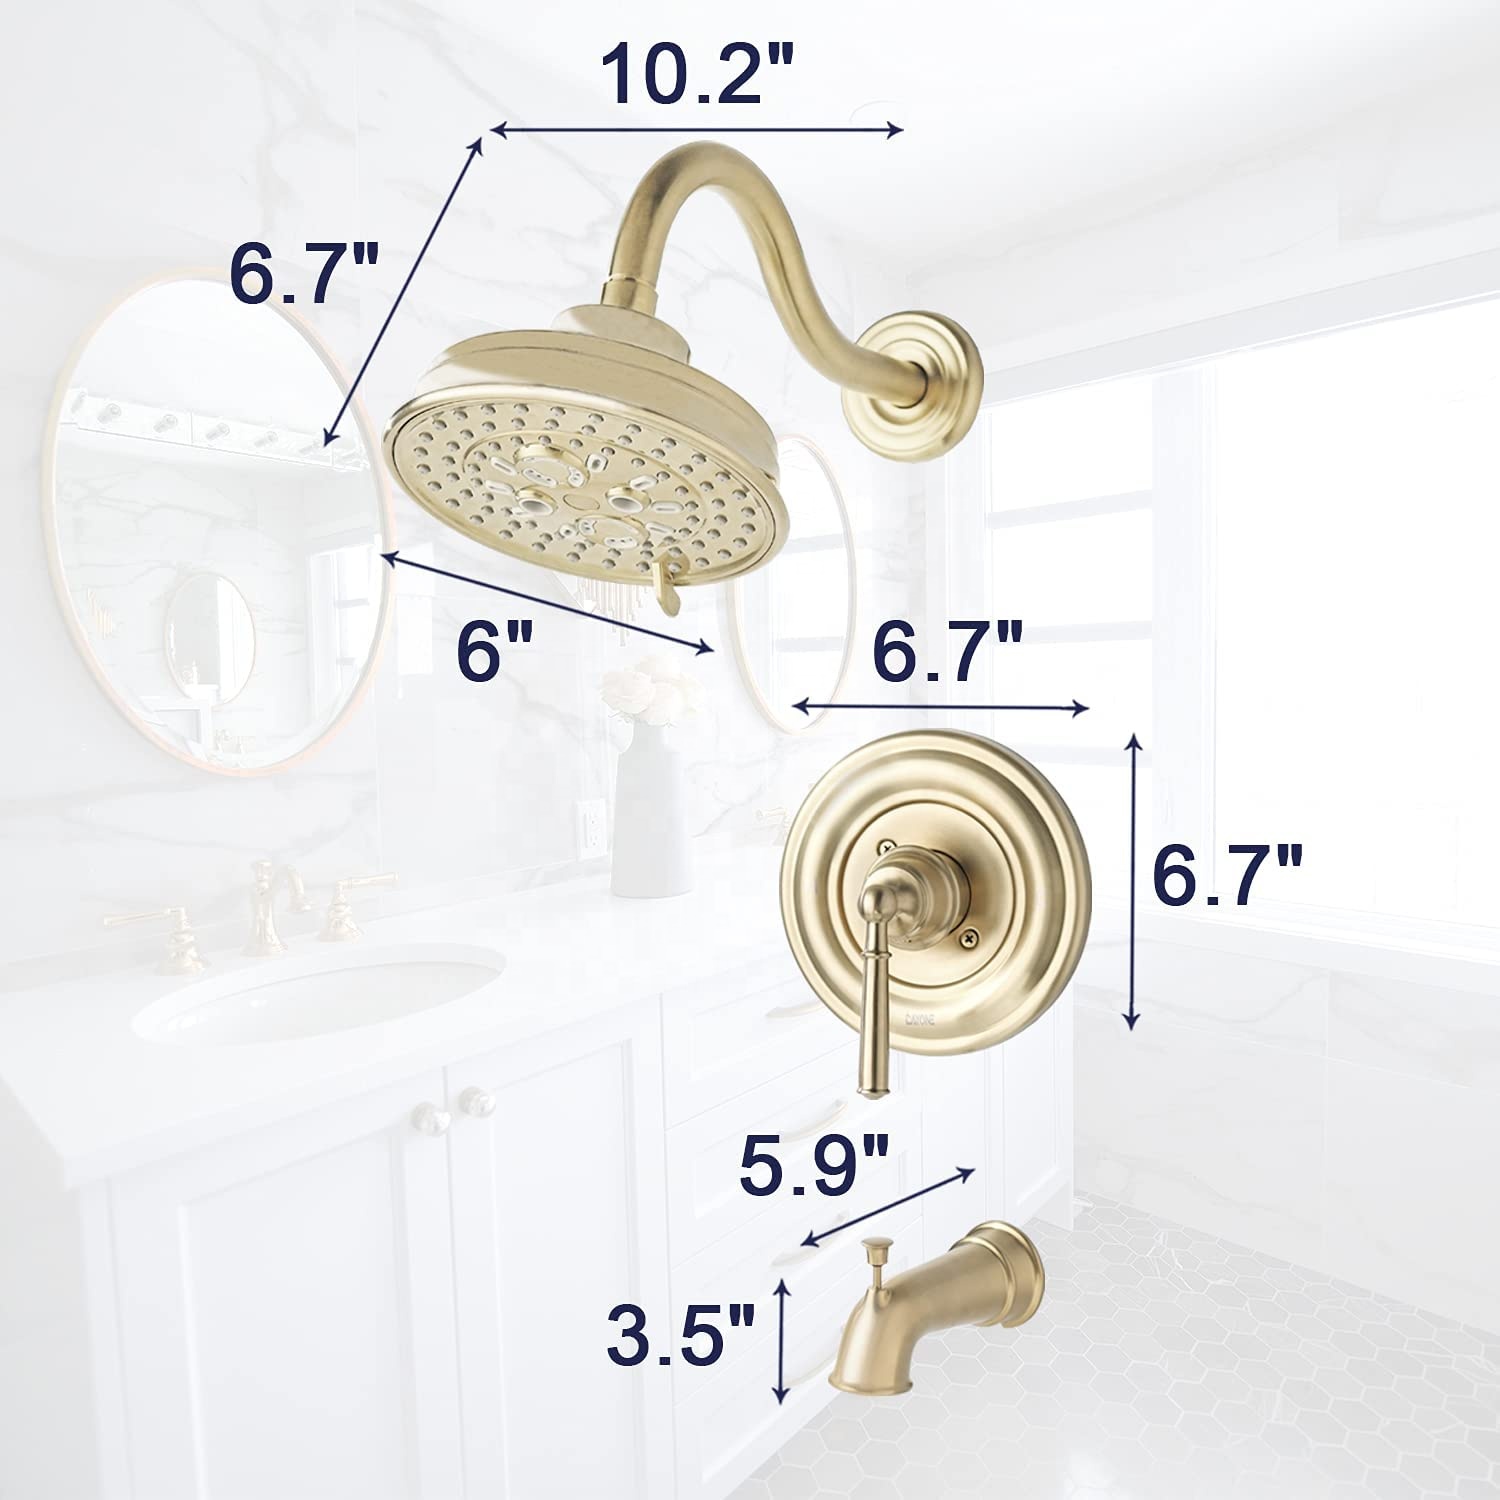 China Factory Shower Faucets Mixers Bathroom Gold Luxury Bath Shower Faucets Set